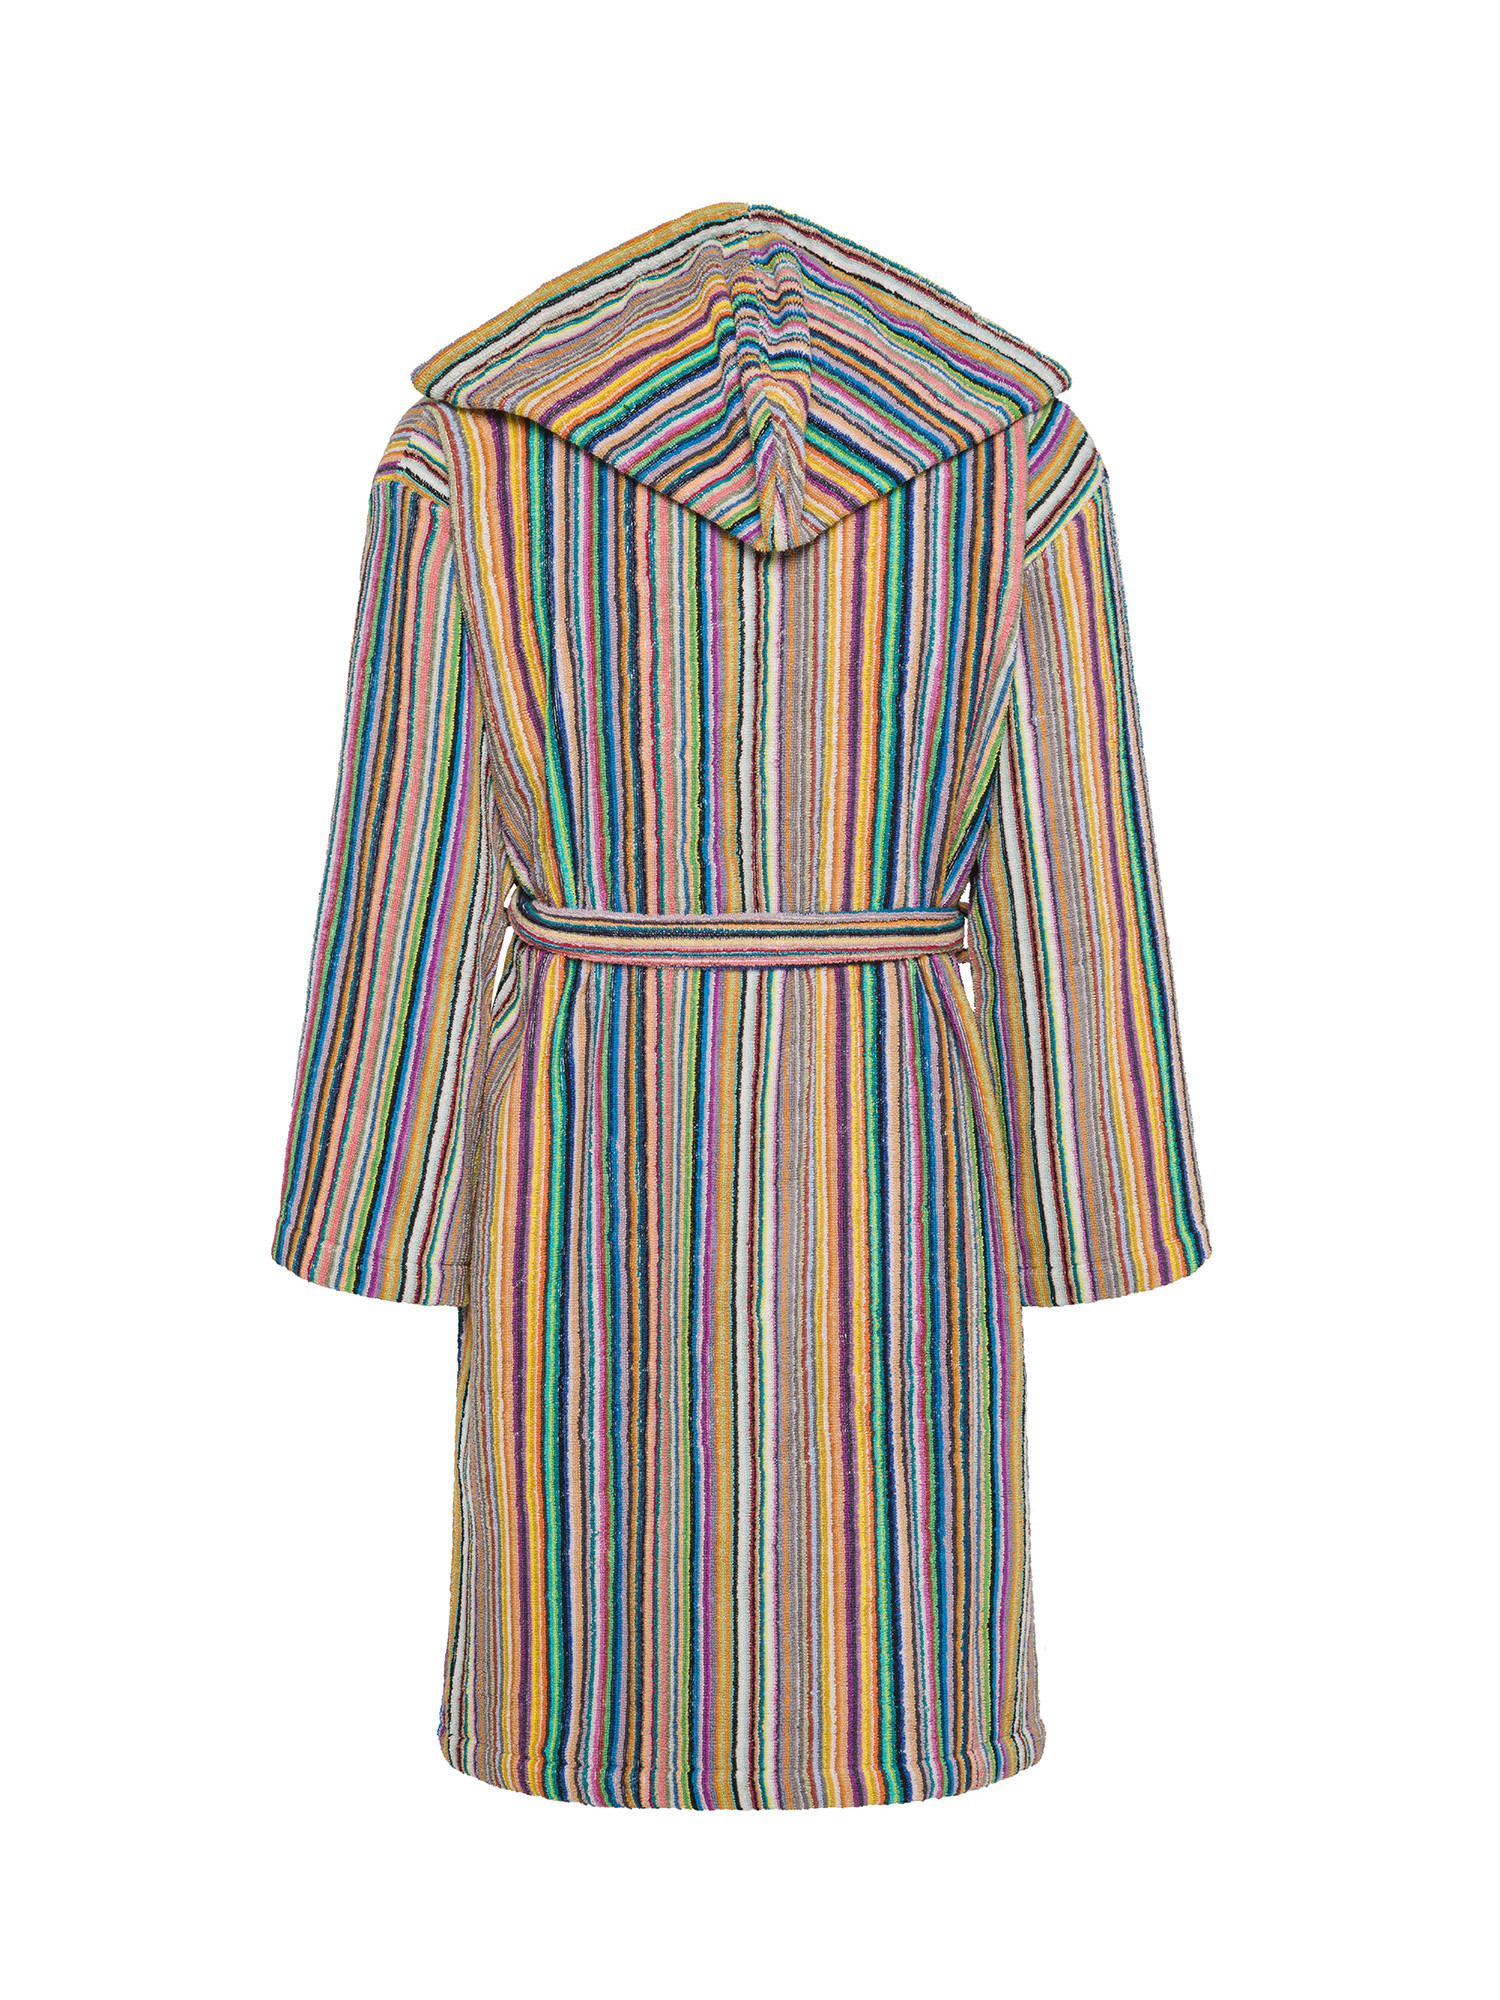 Striped jacquard cotton terry bathrobe, Multicolor, large image number 1